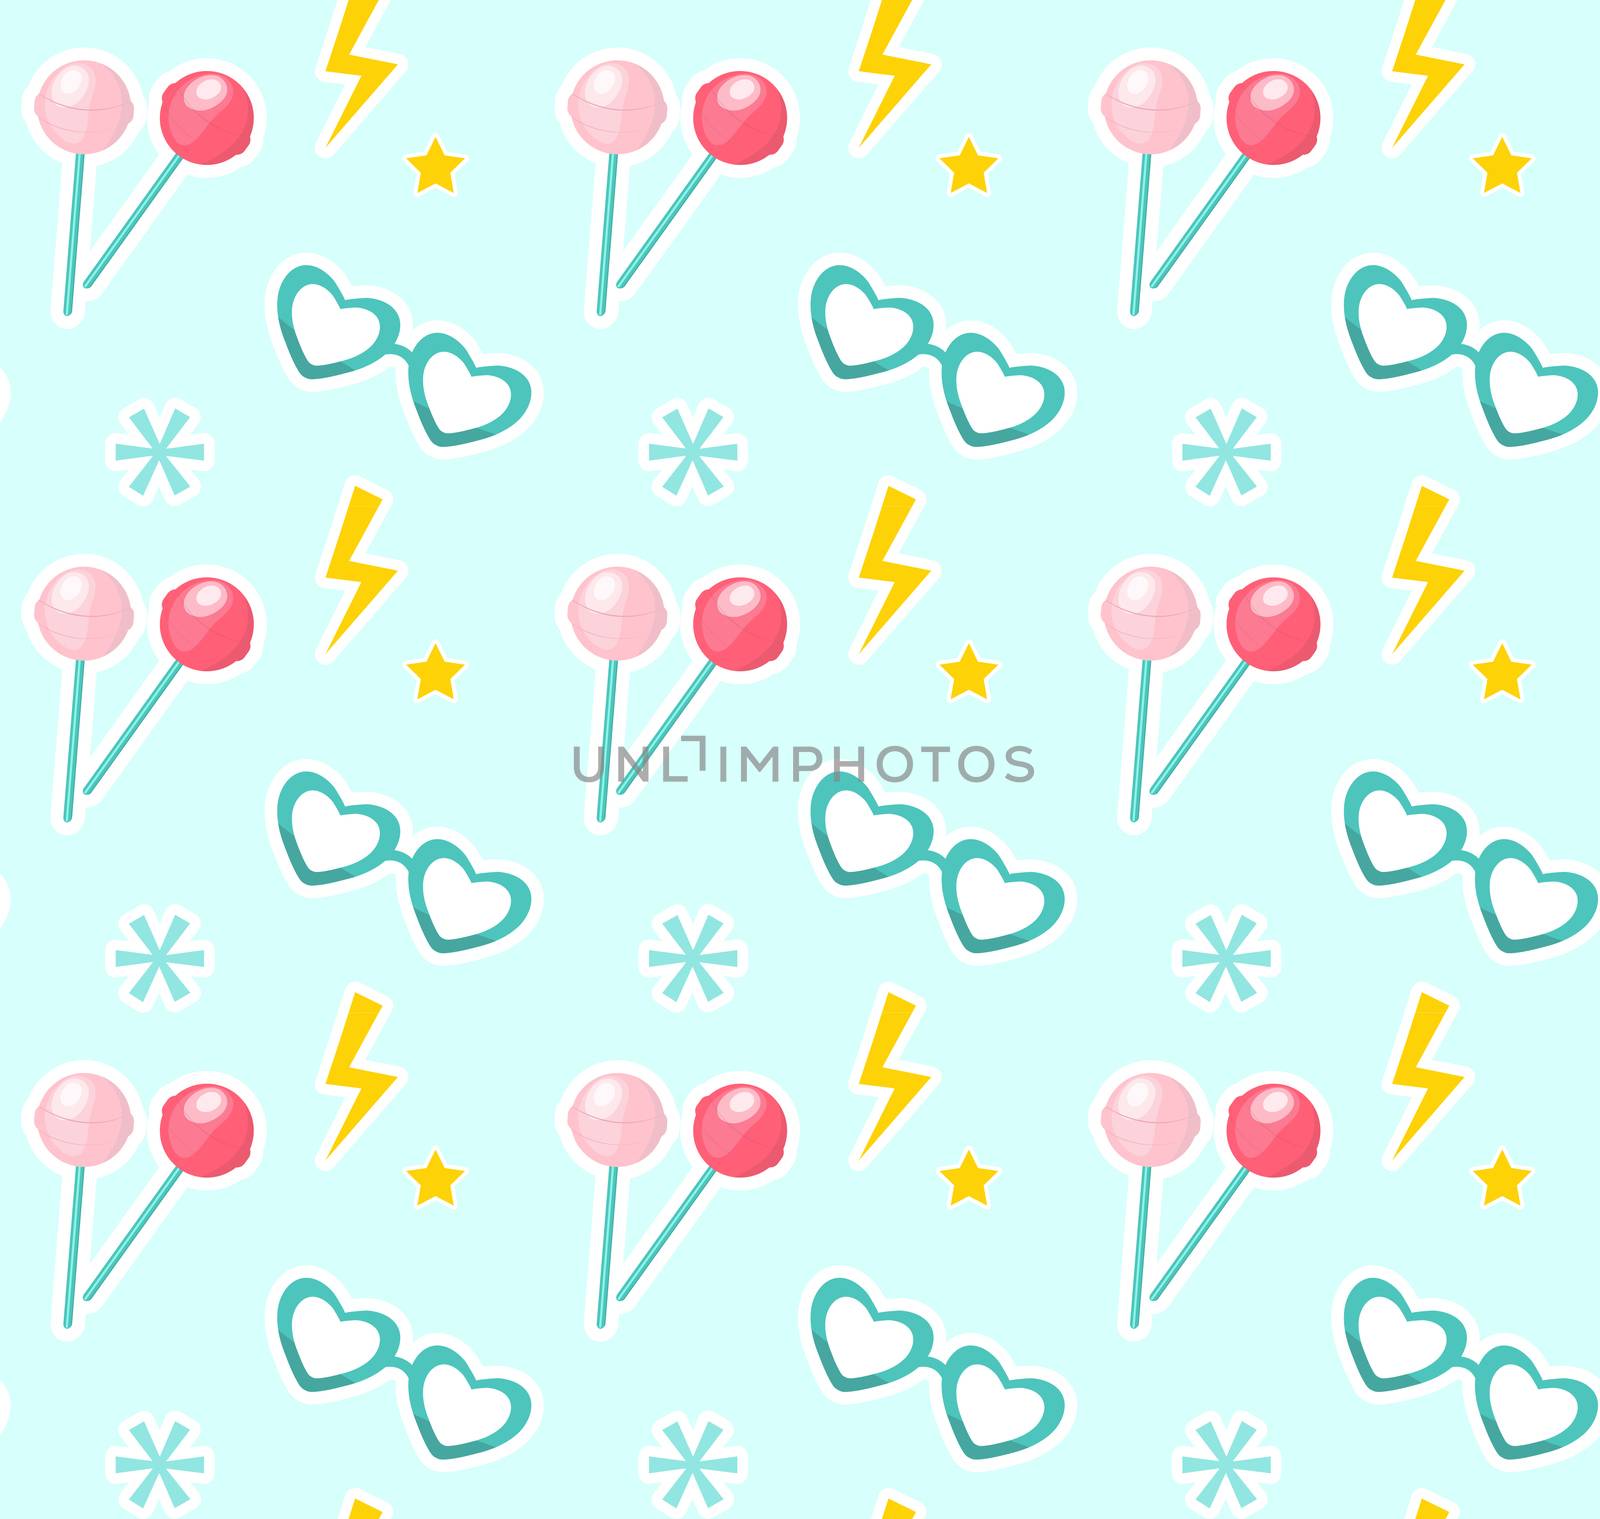 Candy on sticks, glasses in the shape of heart seamless pattern. Fashionable modern endless background, repeating texture. illustration. by lucia_fox